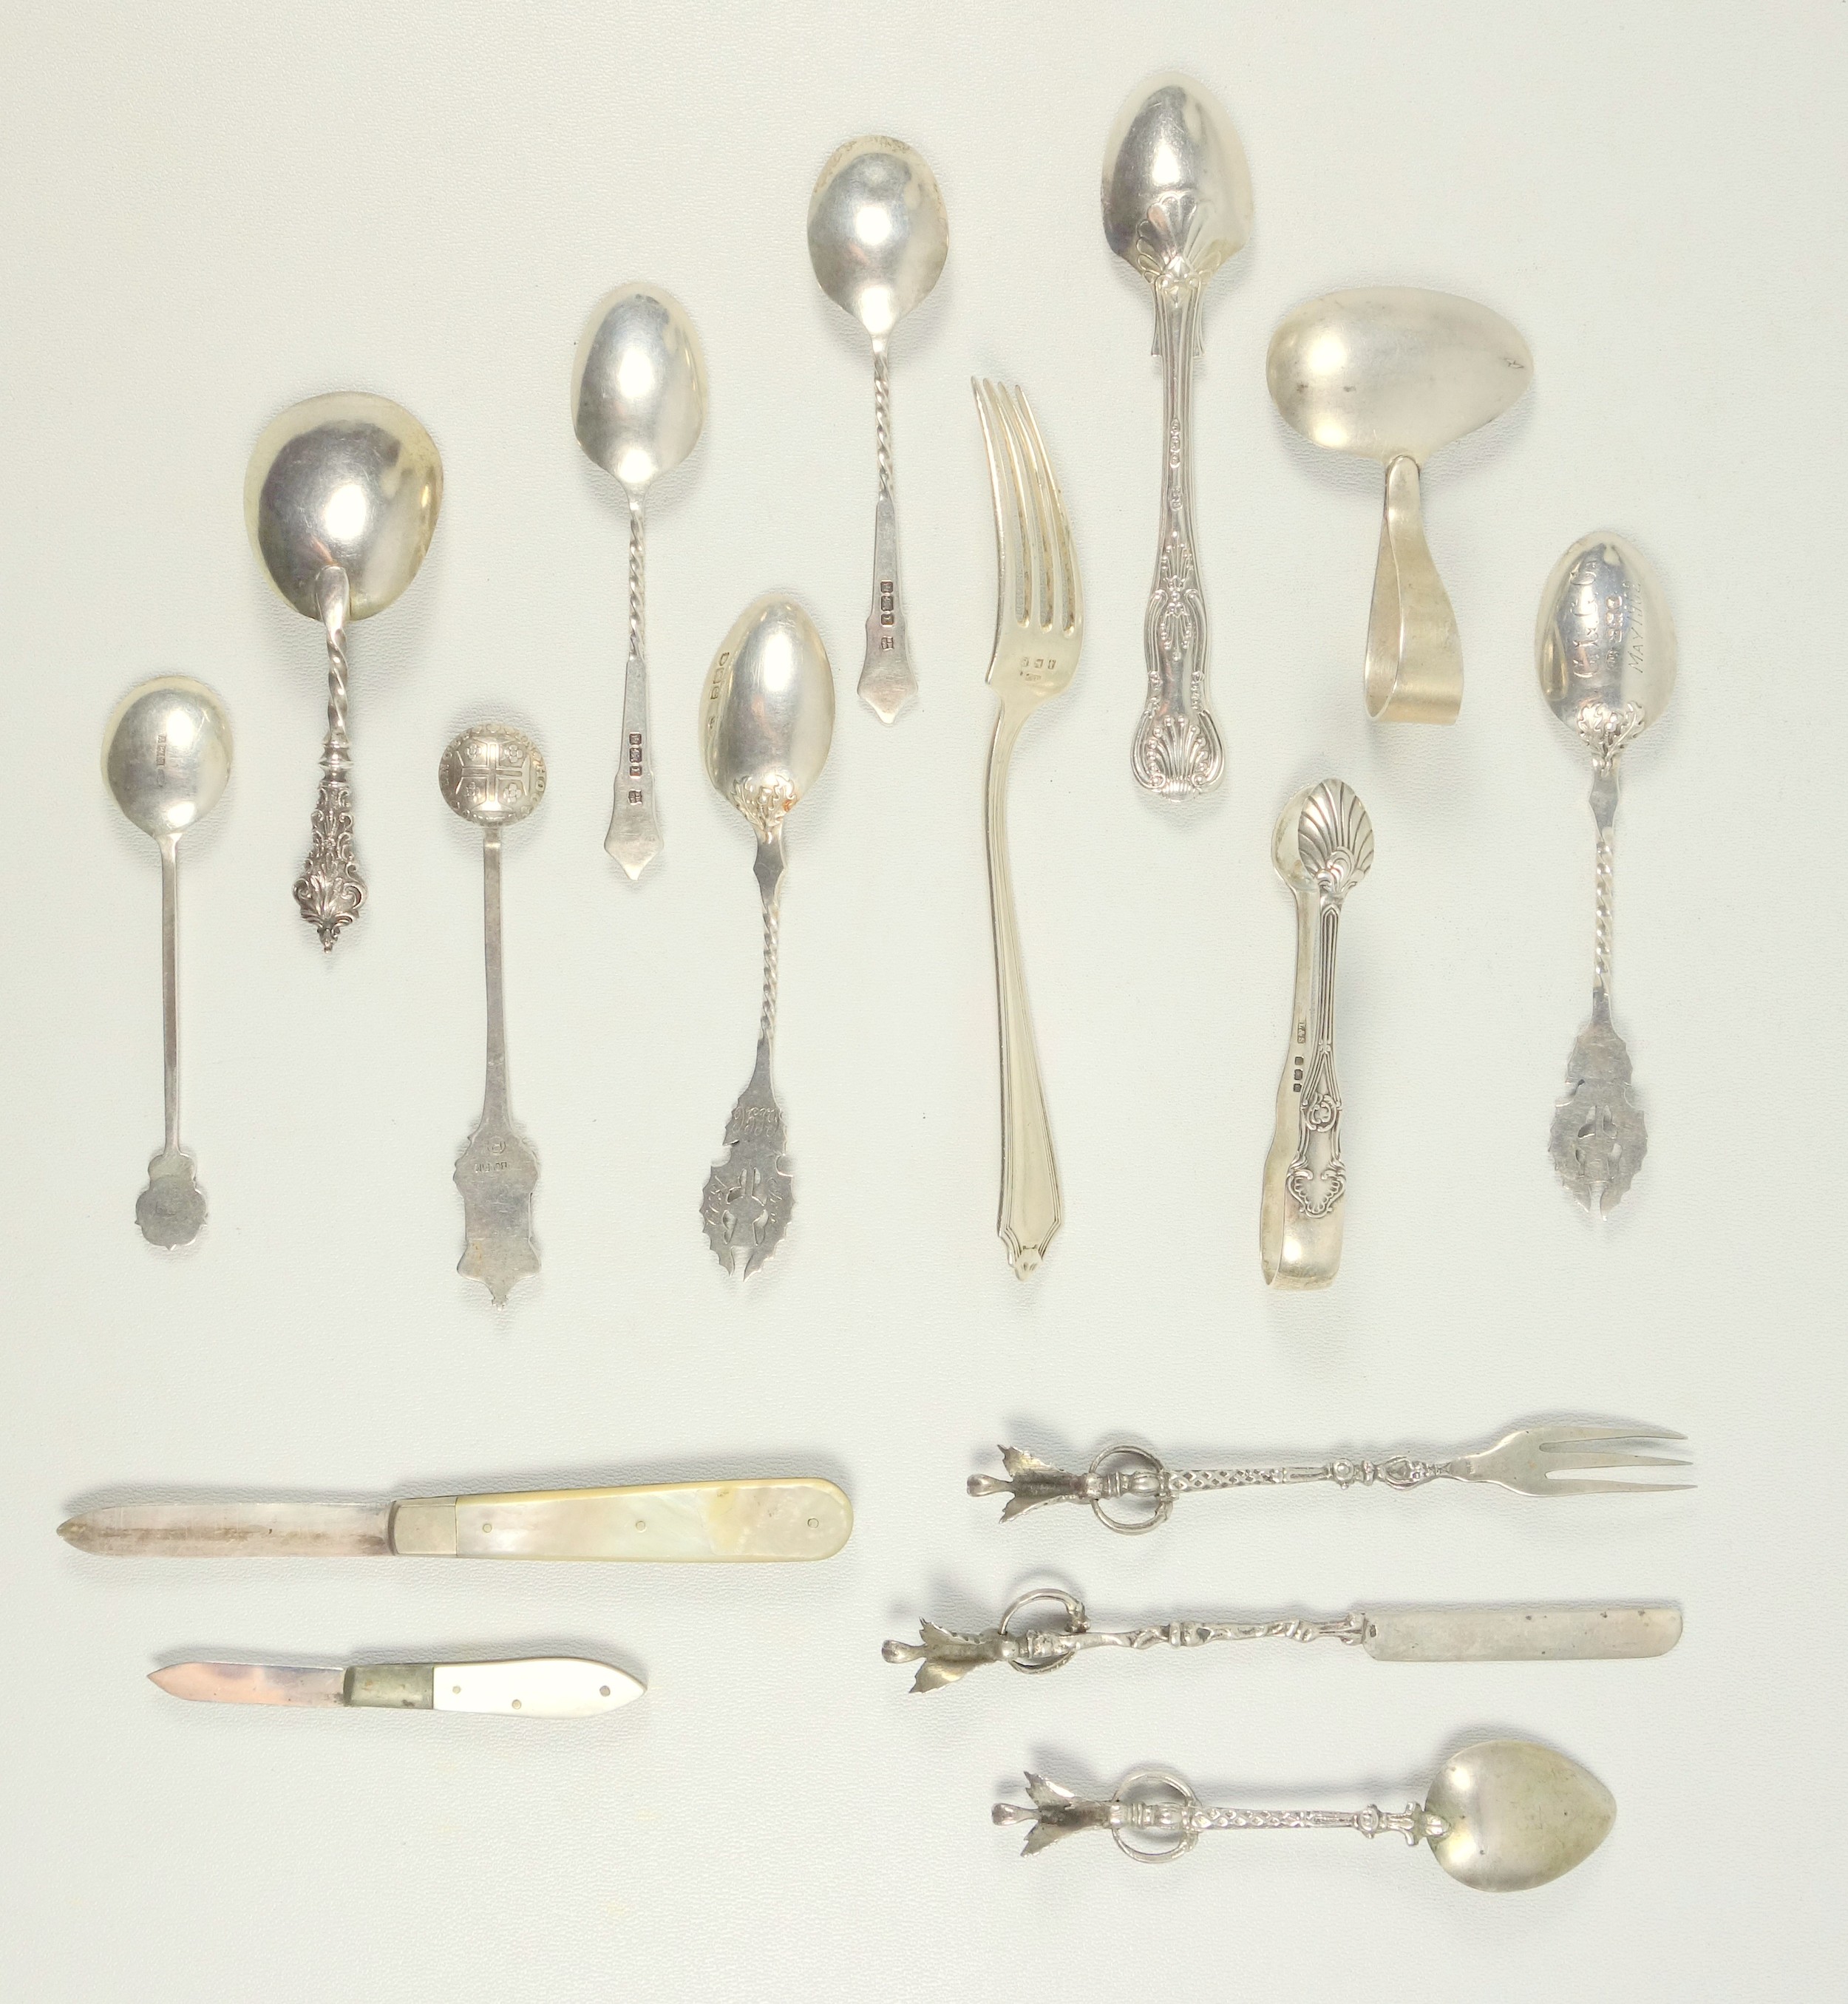 Late Victorian silver King’s pattern egg spoon, caddy spoon, 6 other spoons, fork, pair of tongs, - Image 2 of 2